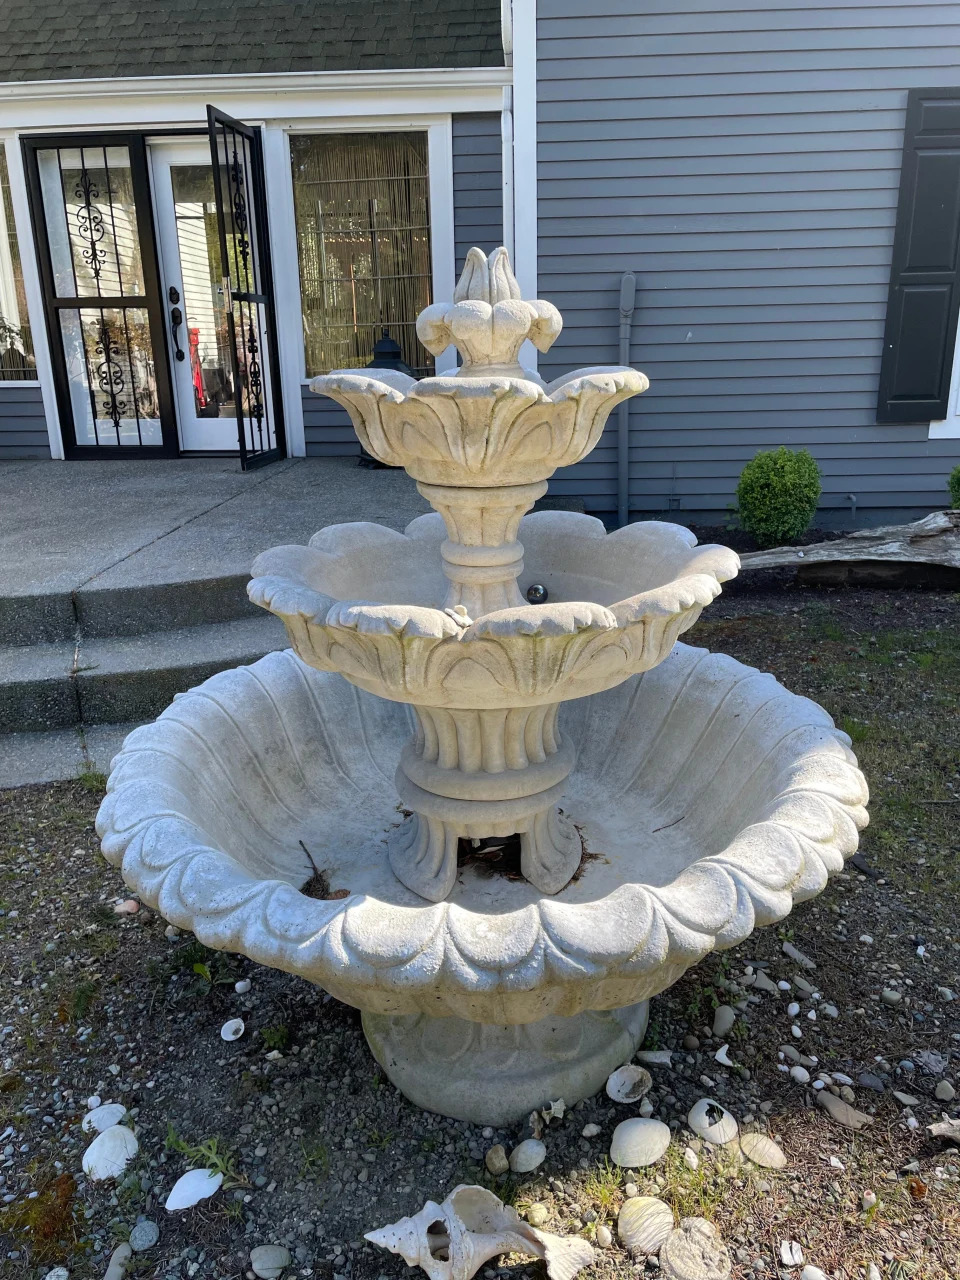 We recently sold this fountain on Facebook Marketplace. We priced it at $400 and had a dozen offers within the first hour.